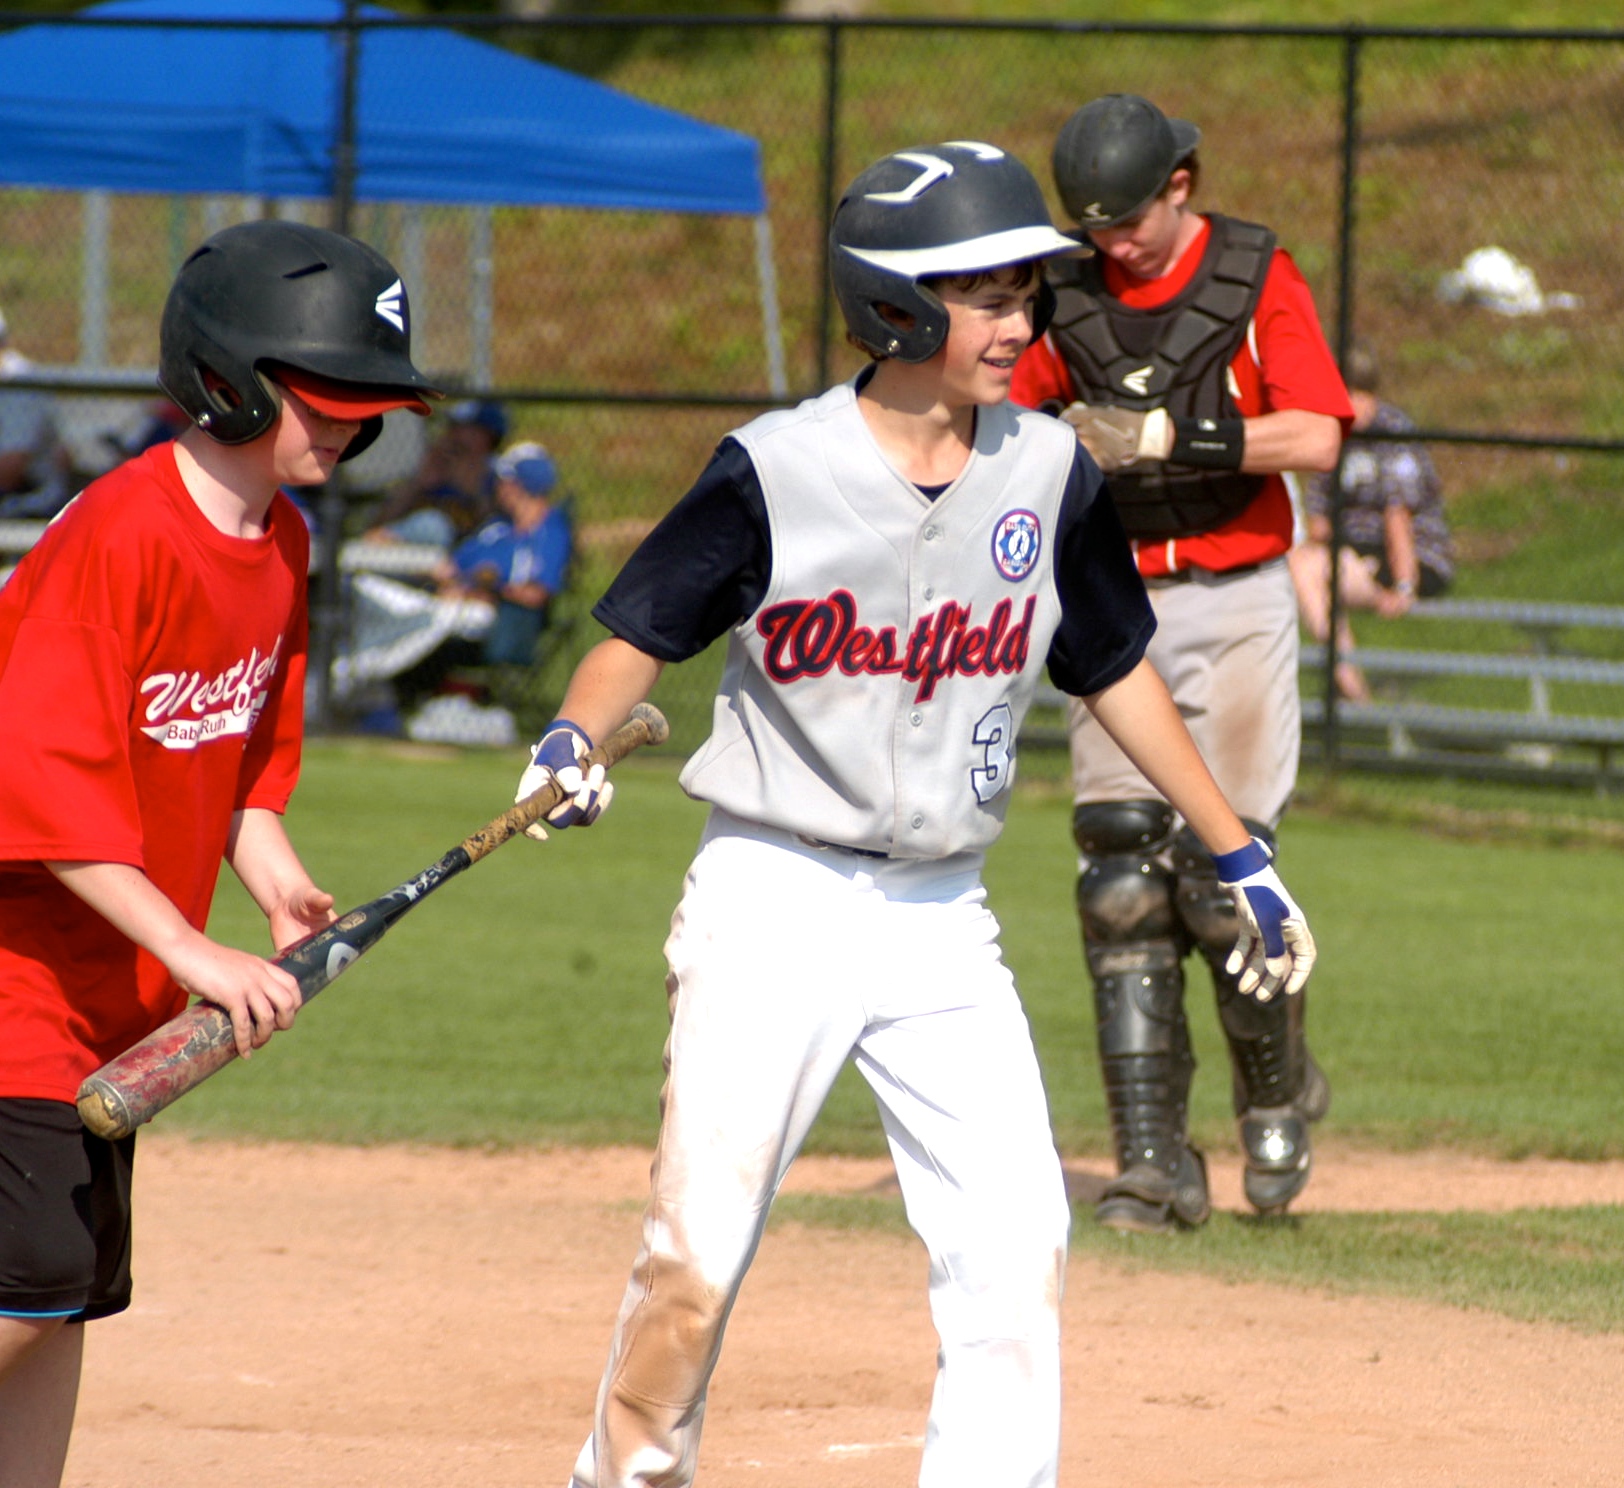 Baseball Cranks Five Homers in 15-6 Win Over Westfield State